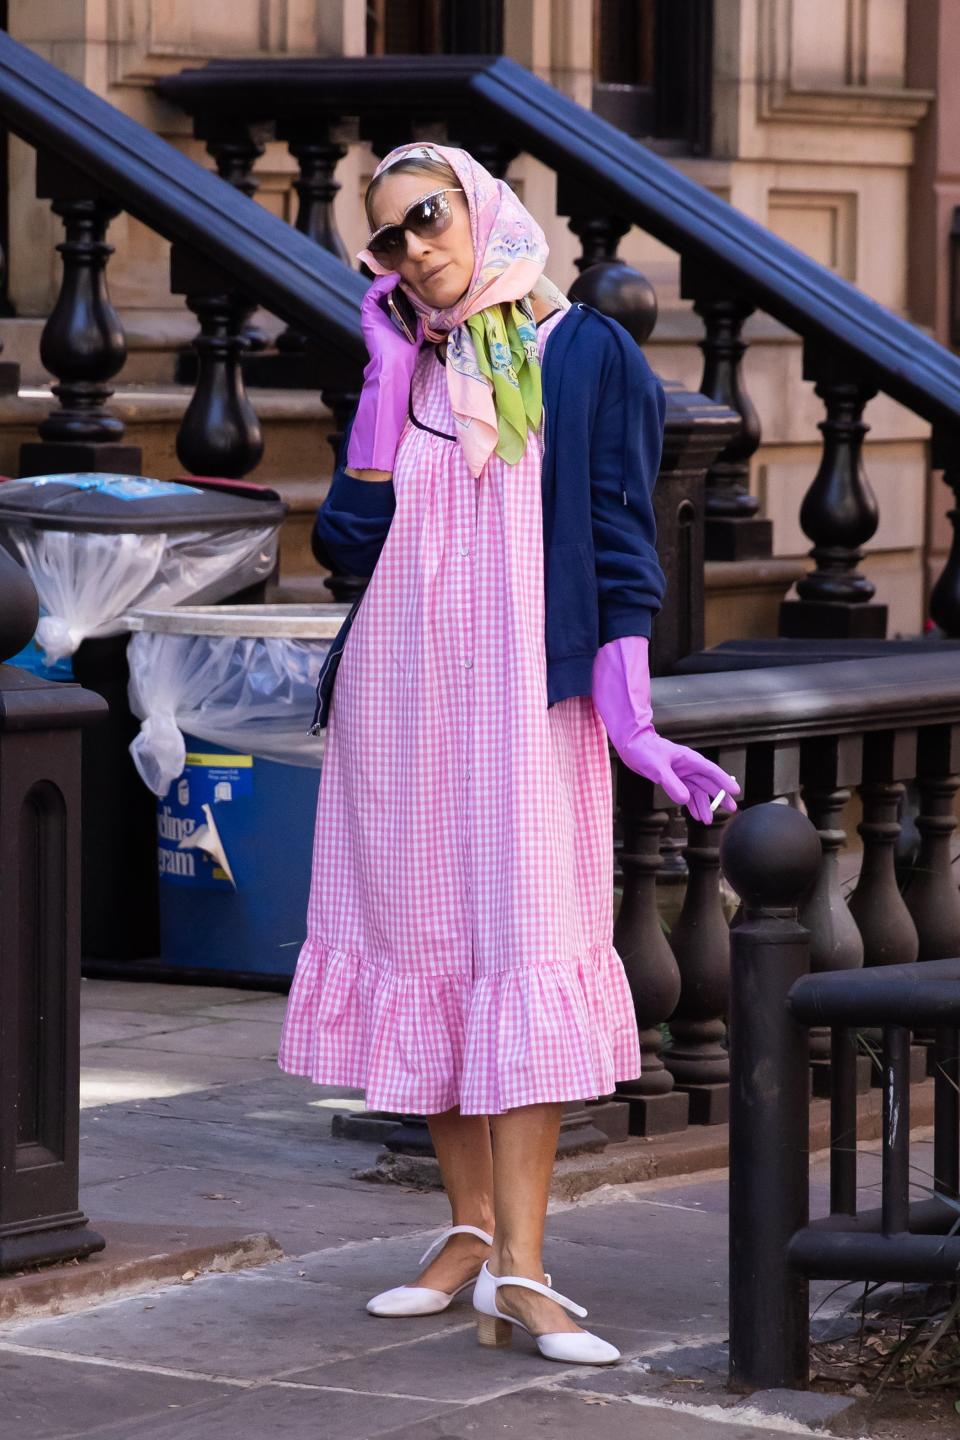 Sarah Jessica Parker films “And Just Like That…” in New York City. - Credit: RCF / MEGA